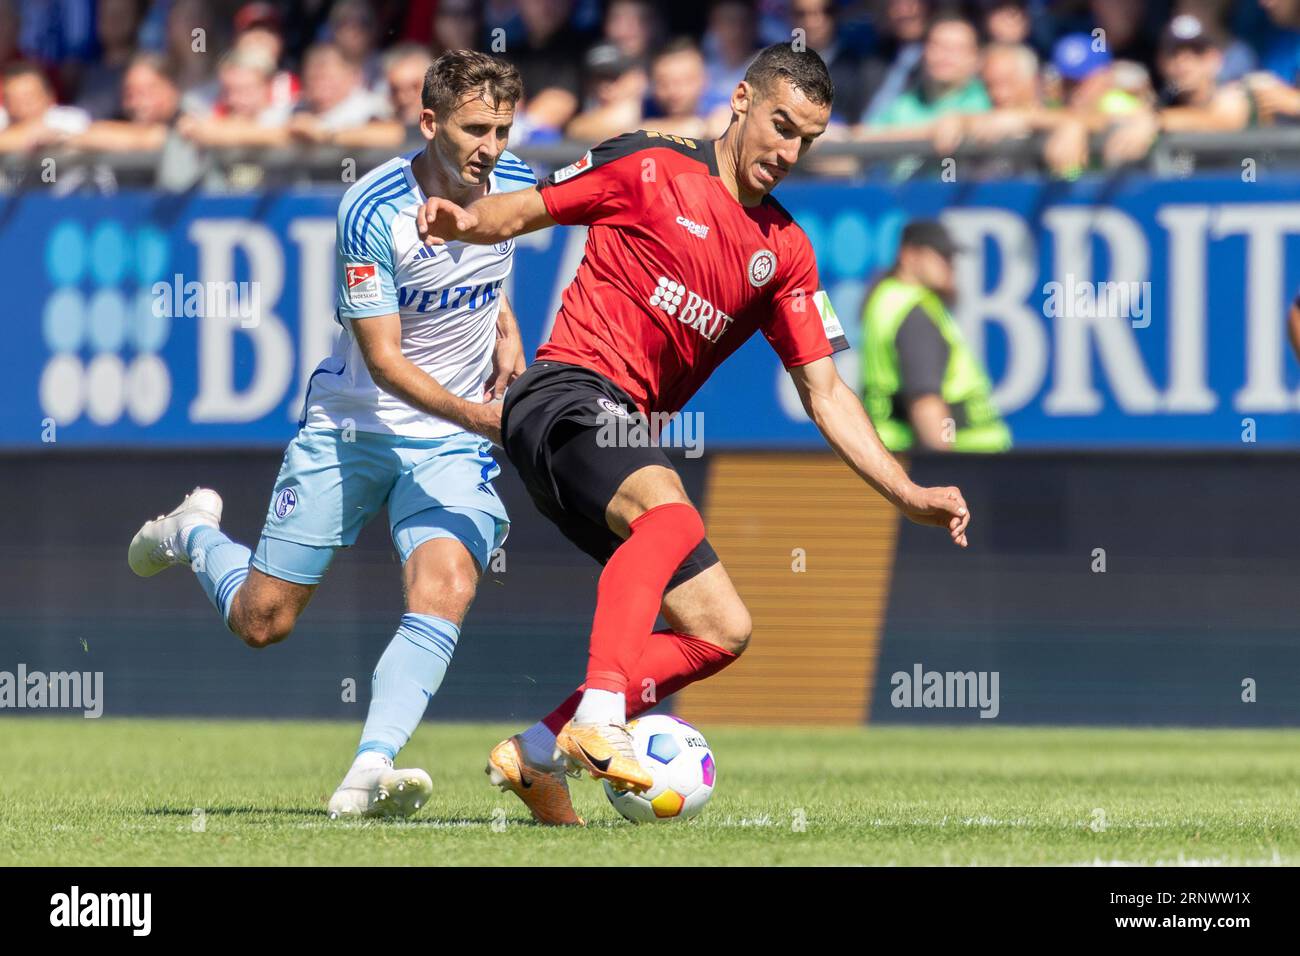 Wiesbaden, Germany. 02nd Sep, 2023. Soccer: 2nd Bundesliga, Matchday 5, SV Wehen Wiesbaden - FC Schalke 04 at BRITA Arena. Ivan Prtajin (r, SV Wehen Wiesbaden, 18) is pursued by Paul Seguin (FC Schalke, 7). Credit: Jürgen Kessler/dpa - IMPORTANT NOTE: In accordance with the requirements of the DFL Deutsche Fußball Liga and the DFB Deutscher Fußball-Bund, it is prohibited to use or have used photographs taken in the stadium and/or of the match in the form of sequence pictures and/or video-like photo series./dpa/Alamy Live News Stock Photo